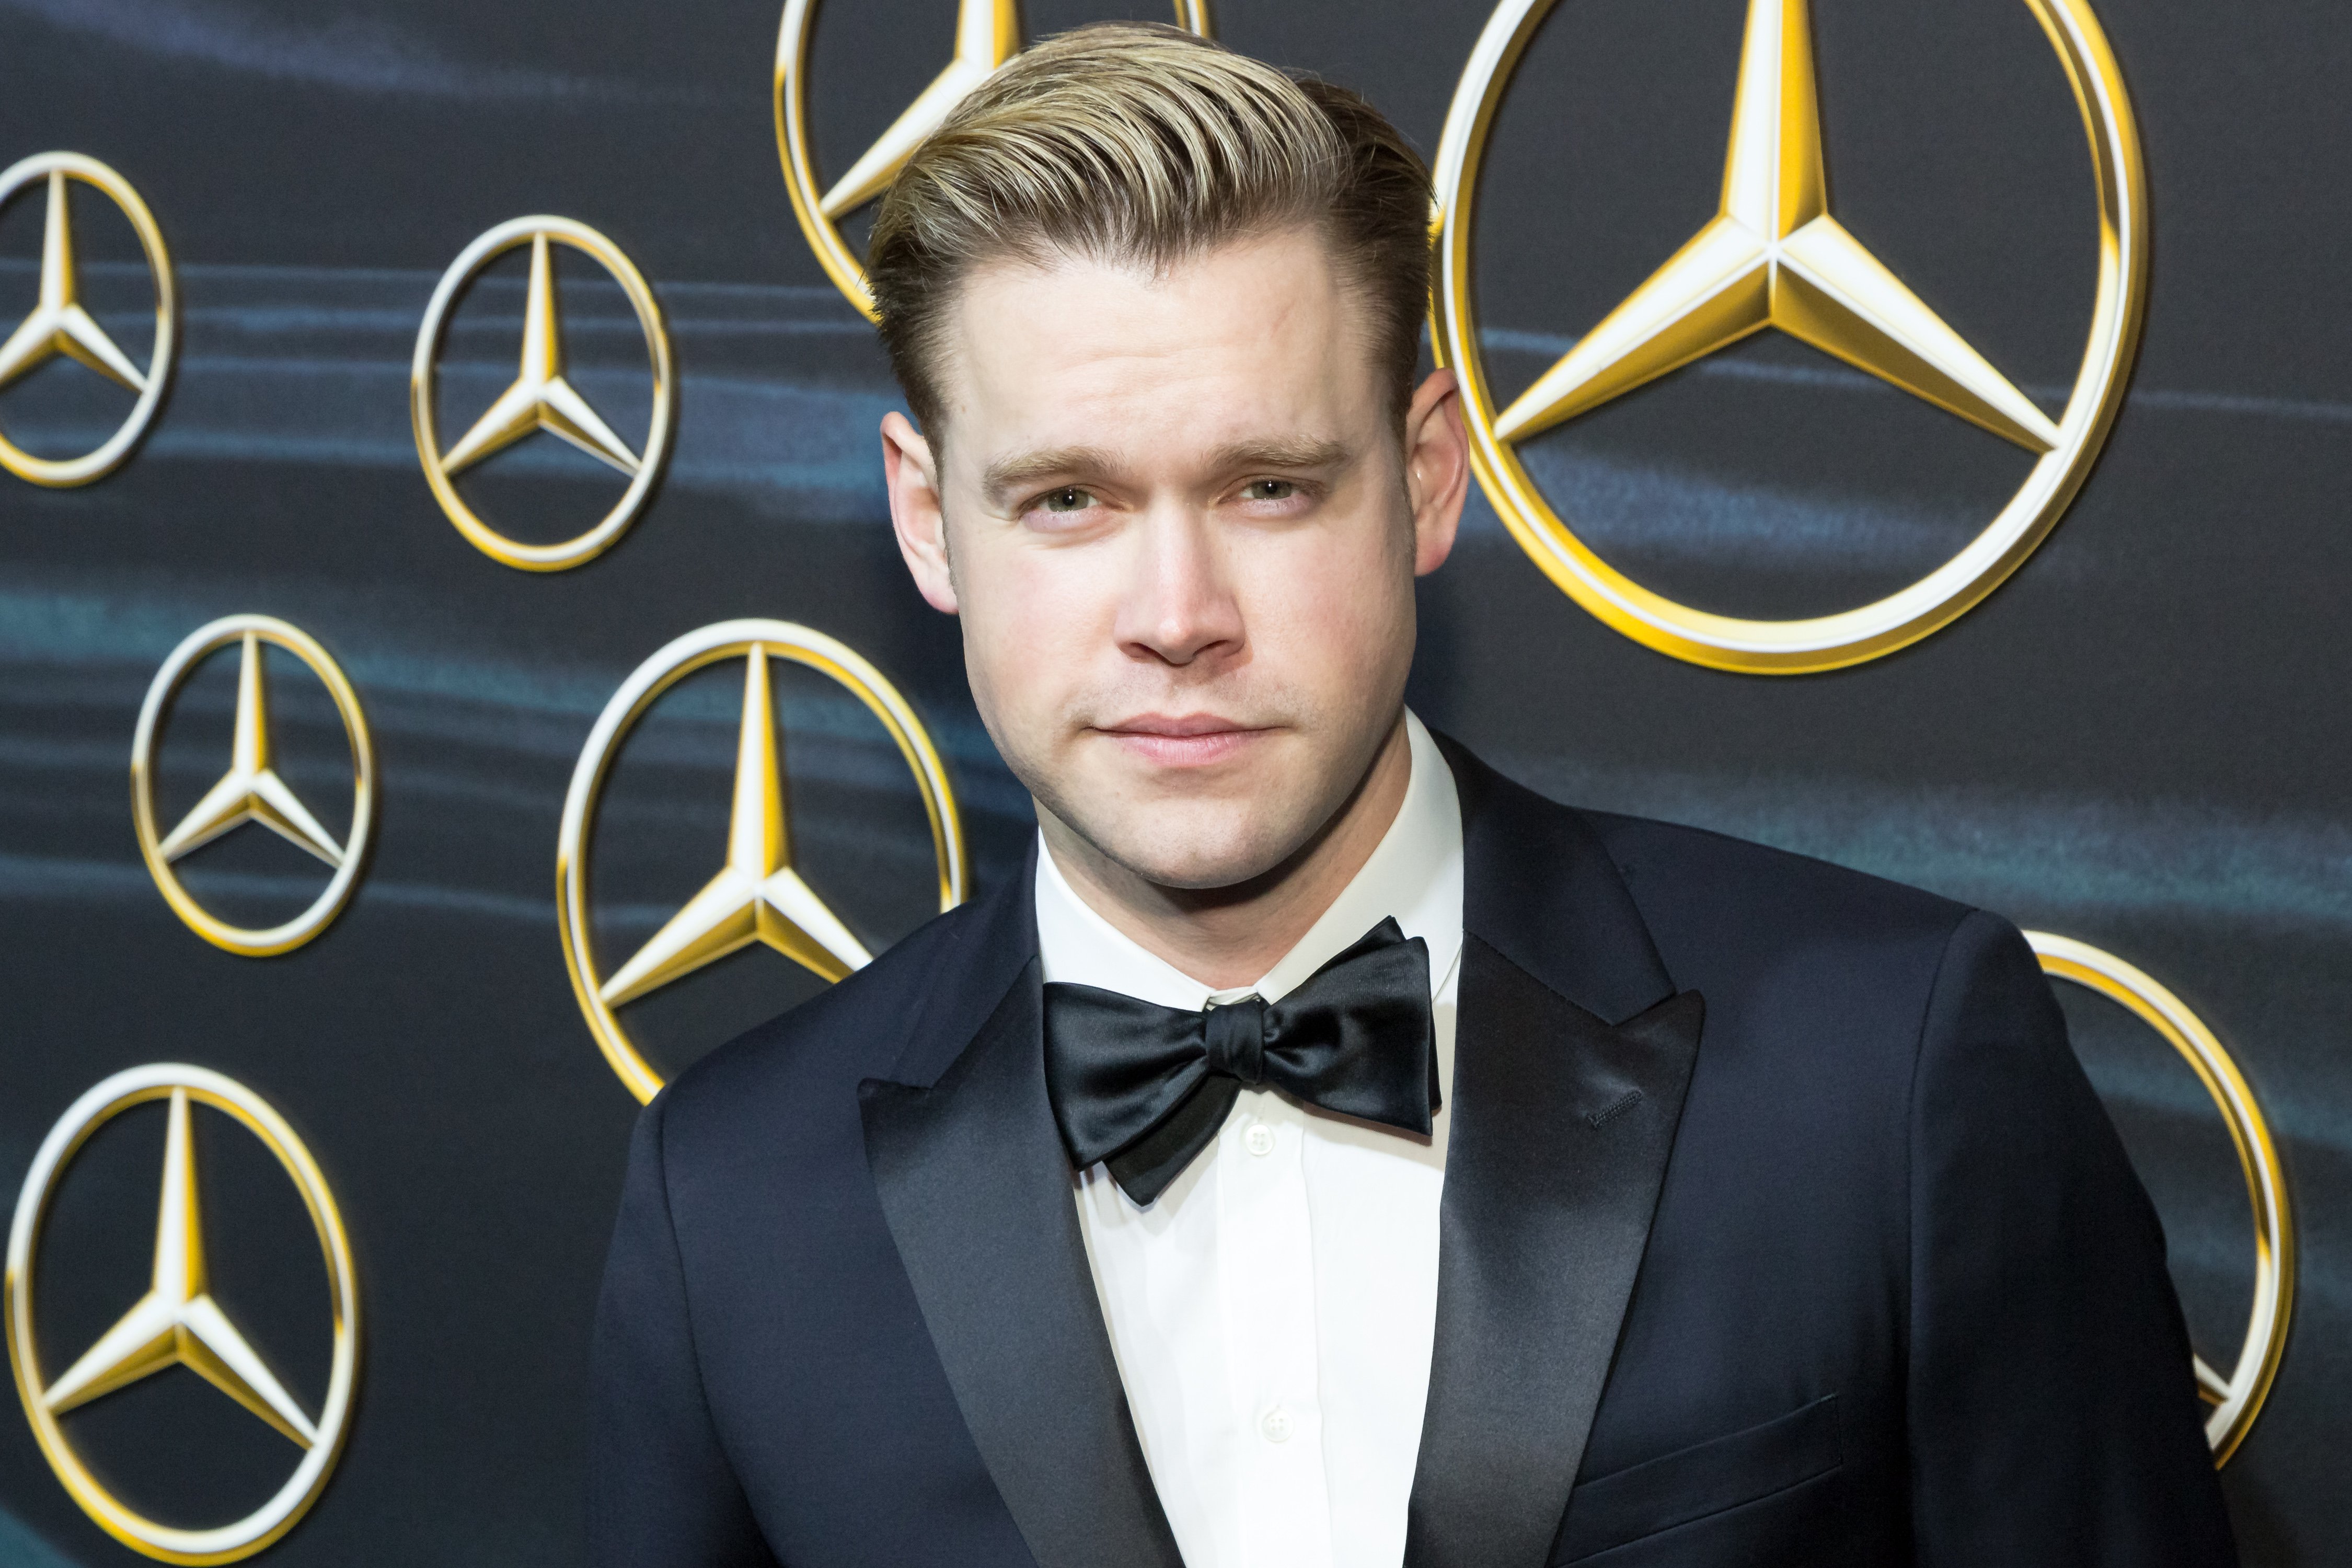 Chord Overstreet attends the Mercedez-Benz USA's Official Awards Viewing Party at Four Seasons Hotel Los Angeles at Beverly Hills on March 4, 2018, in Los Angeles, California. | Source: Getty Images